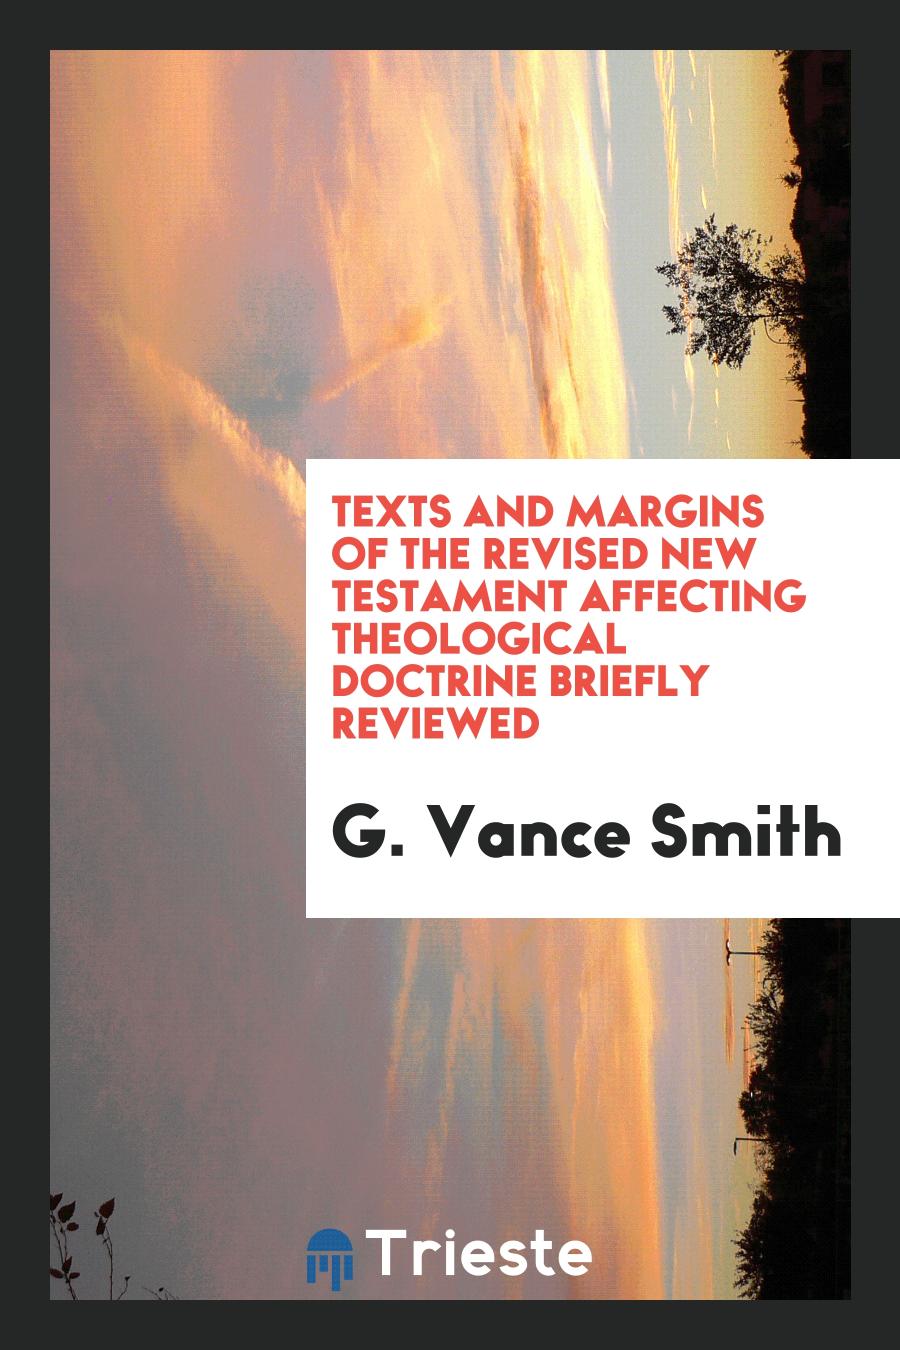 Texts and Margins of the Revised New Testament Affecting Theological Doctrine Briefly Reviewed